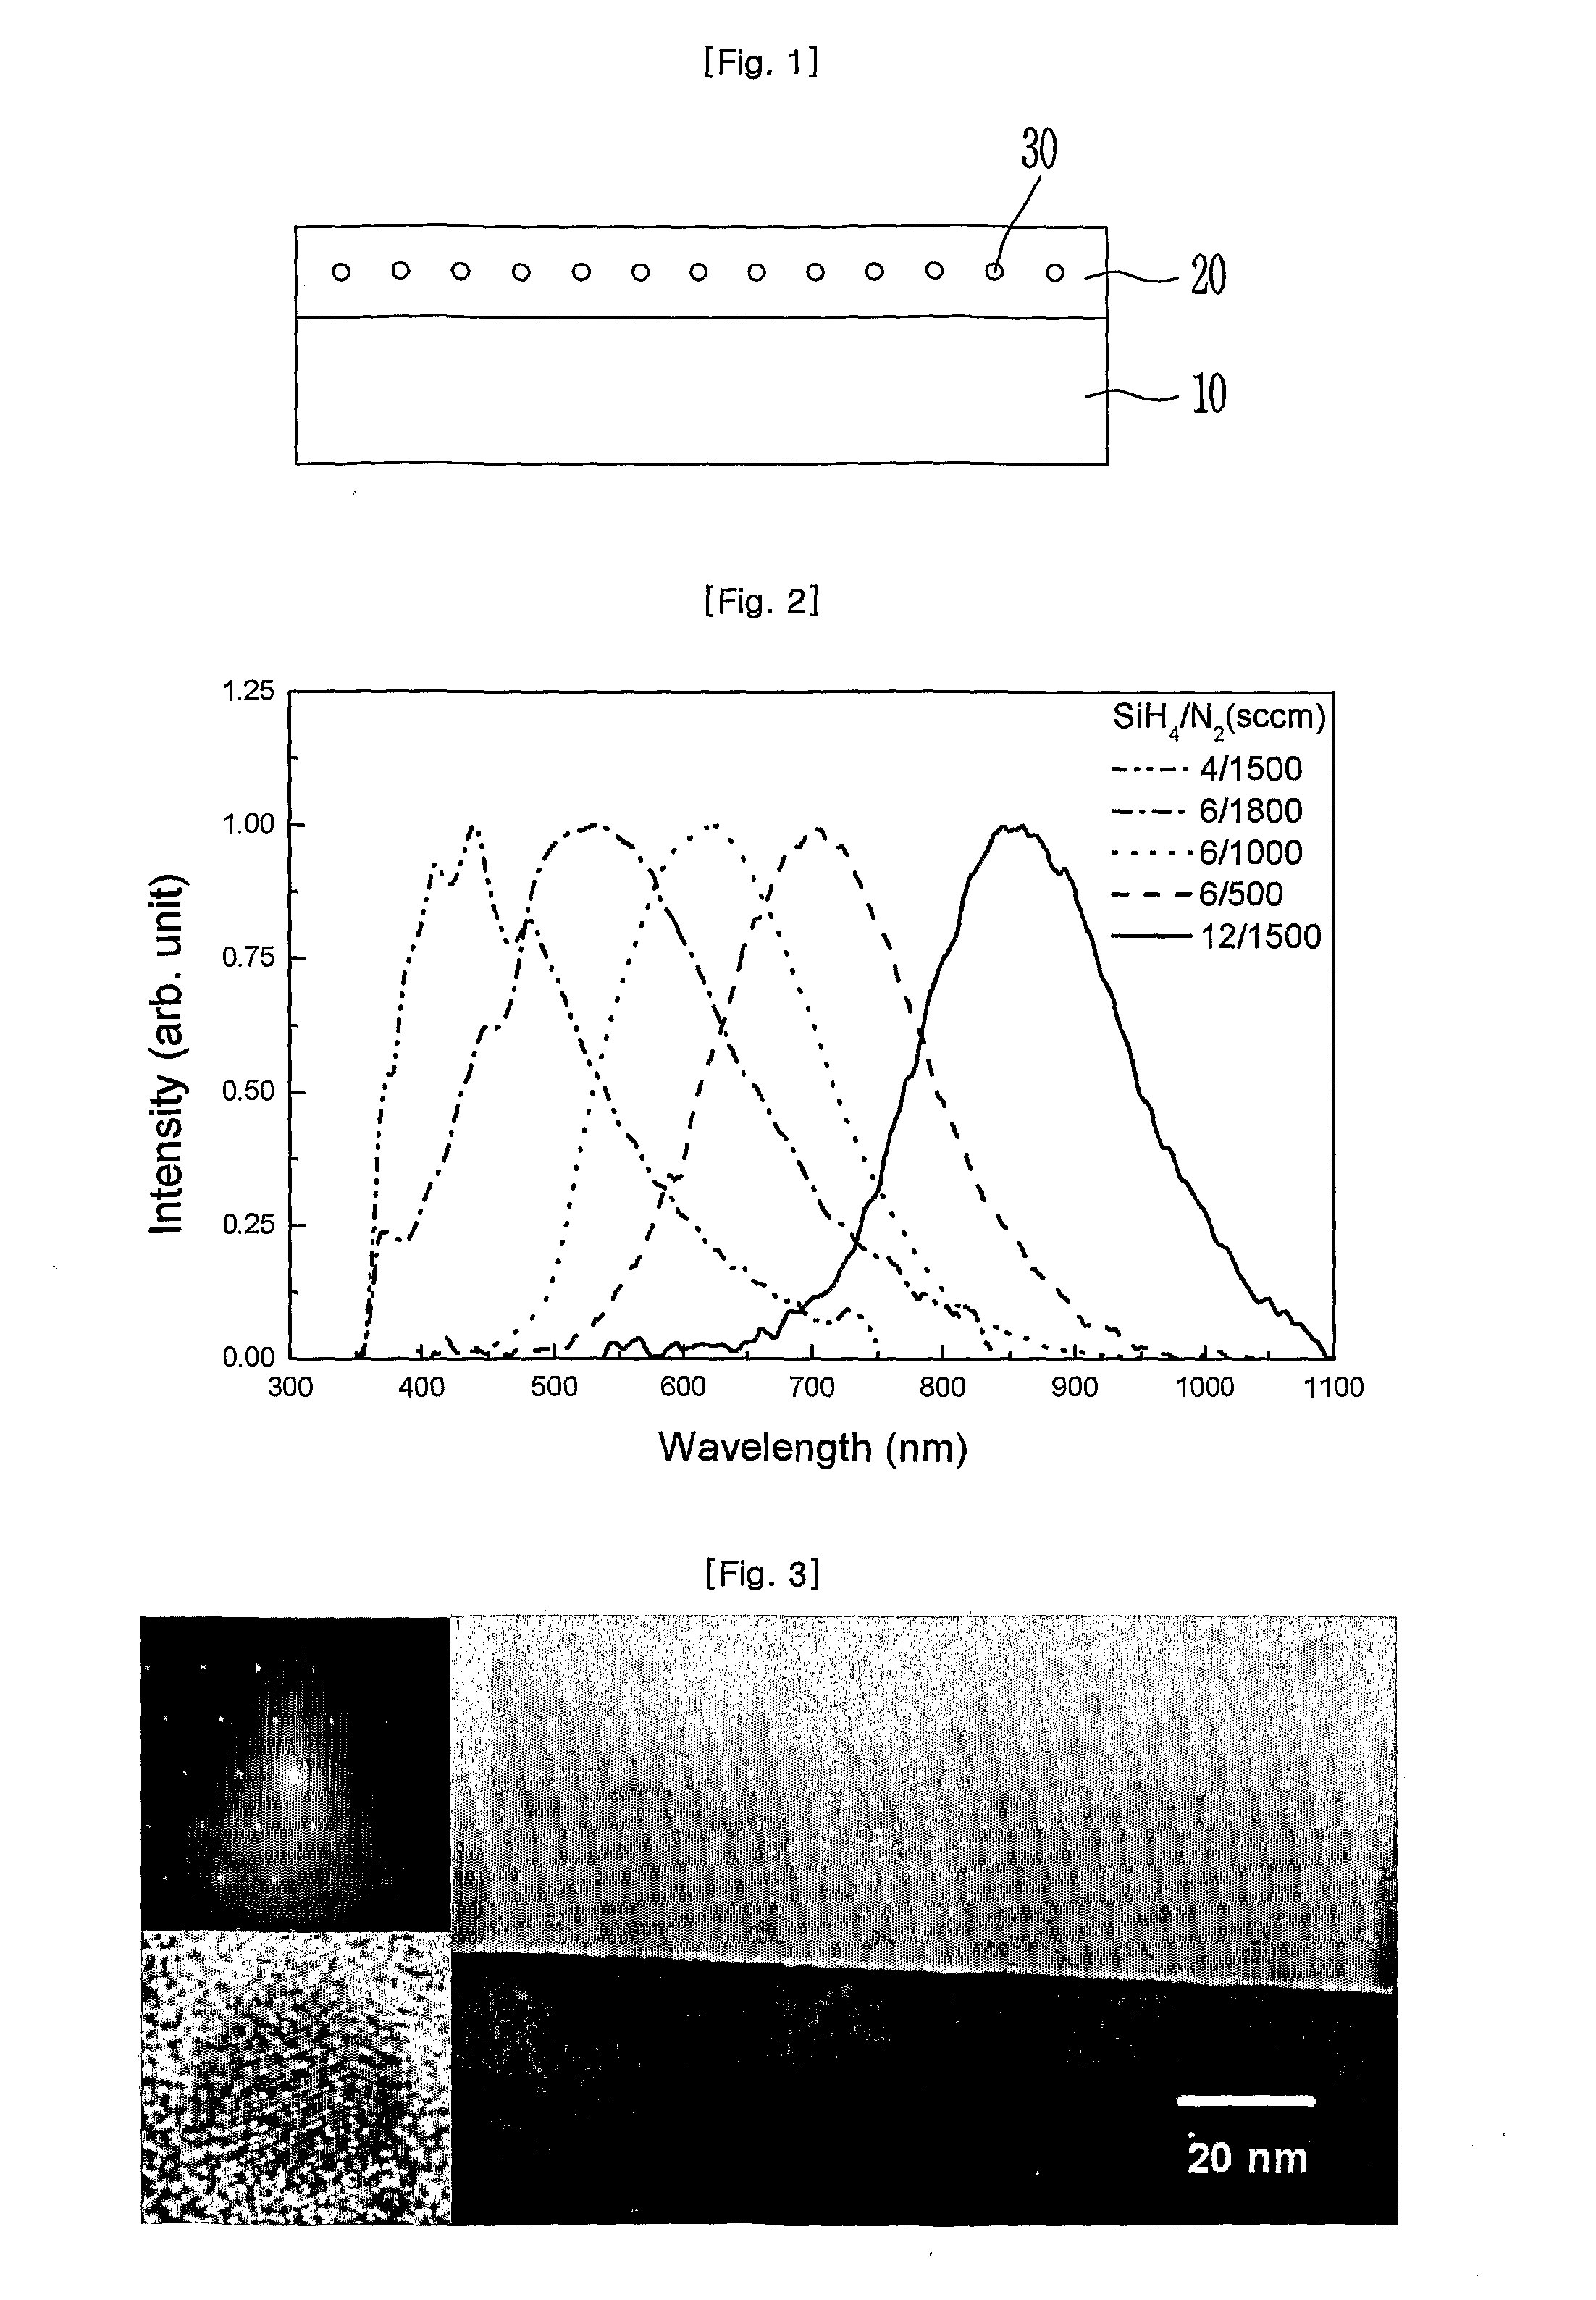 Silicon Nitride Layer for Light Emitting Device, Light Emitting Device Using the Same, and Method of Forming Silicon Nitride Layer for Light Emitting Device